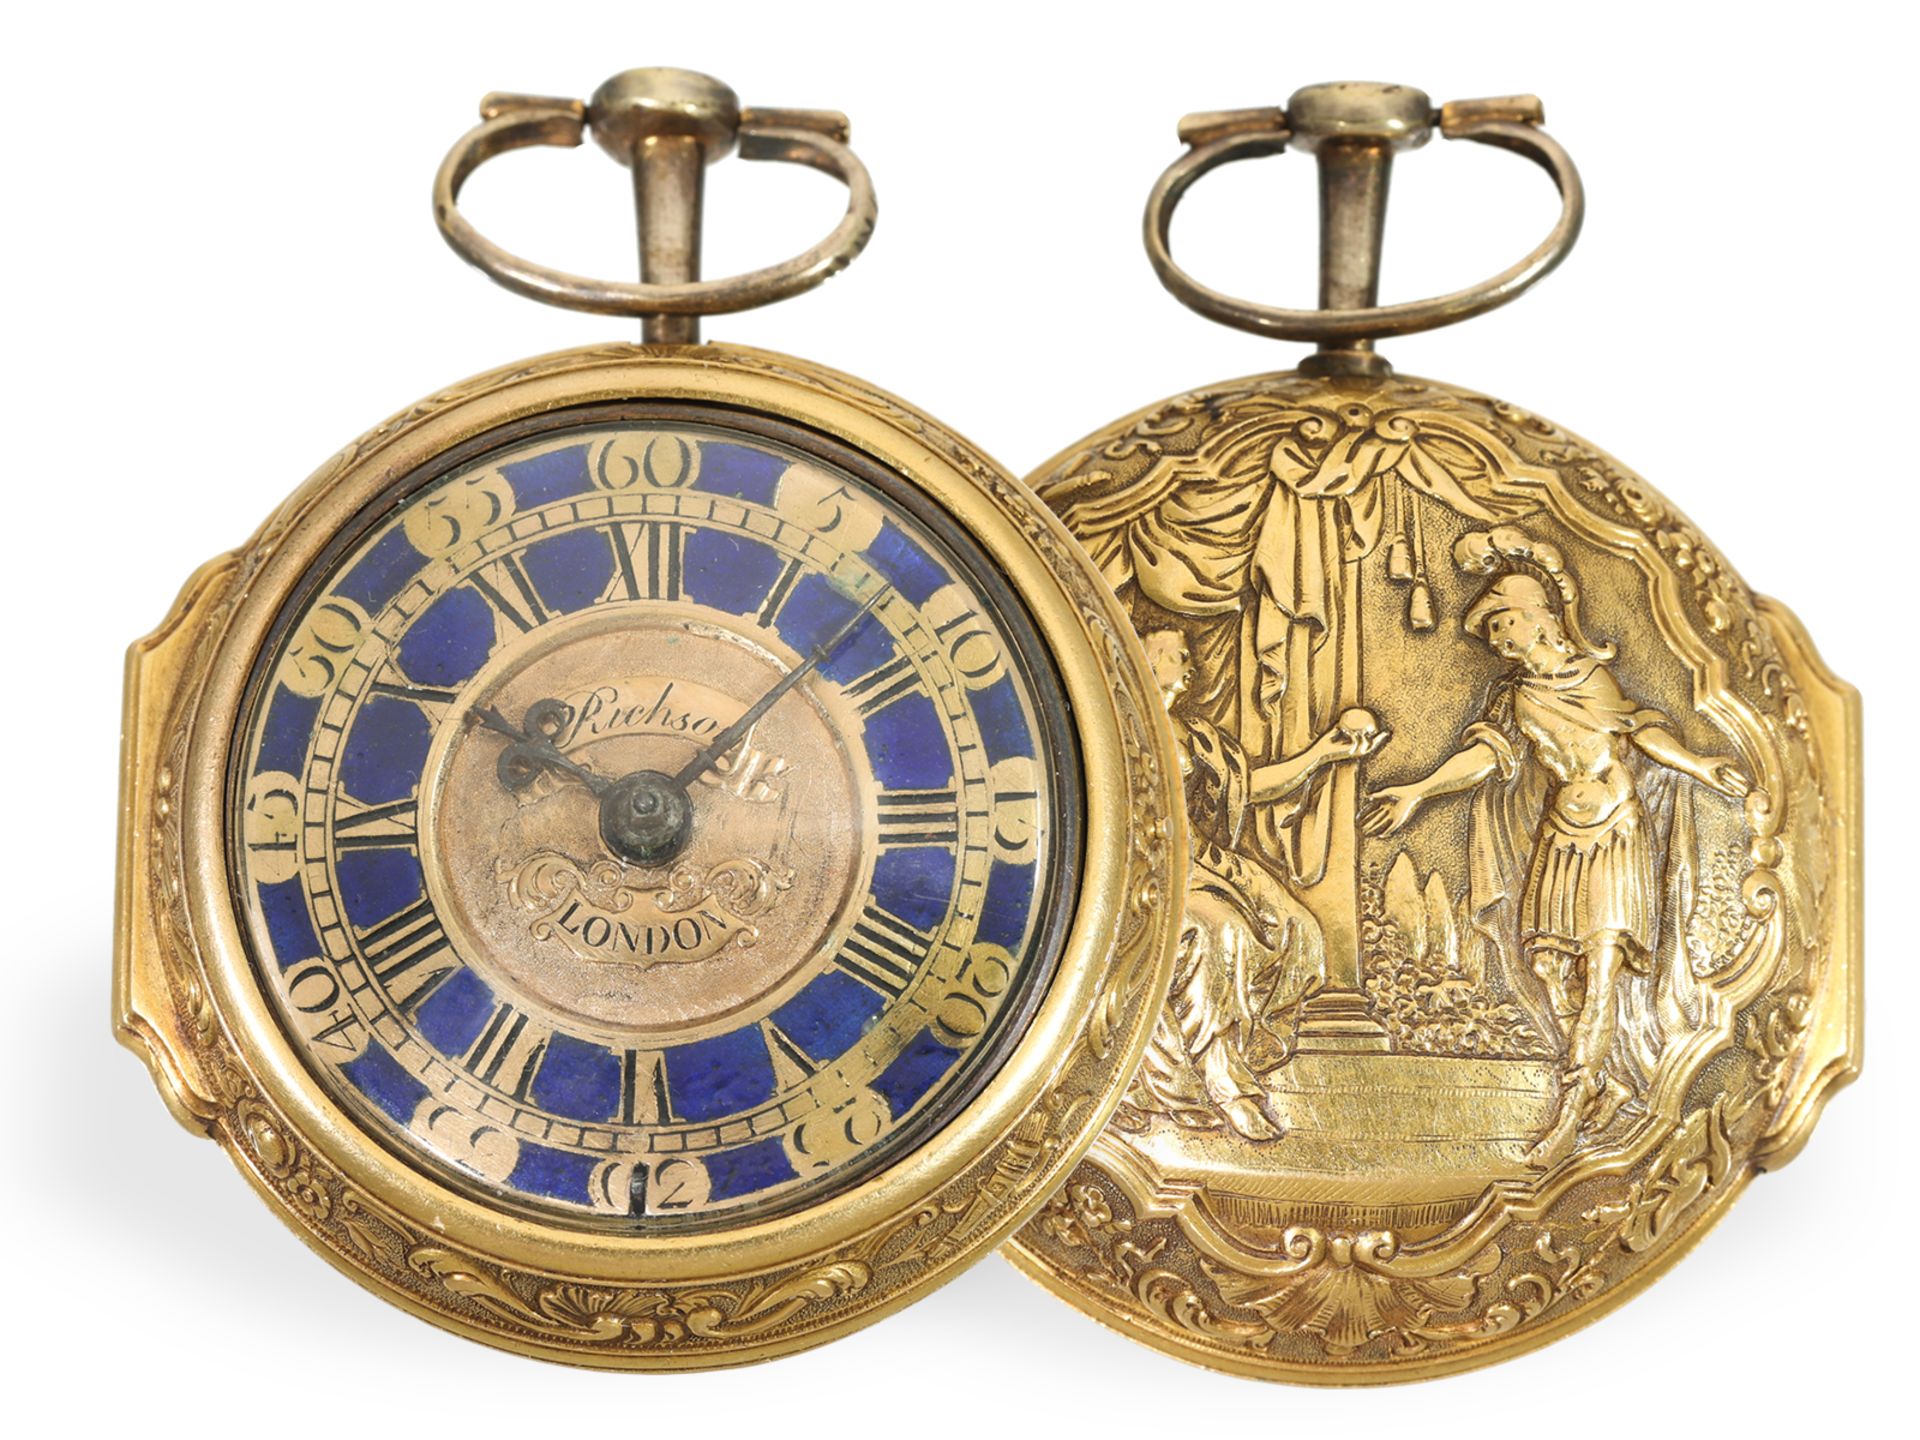 Pocket watch: unusual and very fine repoussé pair case verge watch ca. 1754